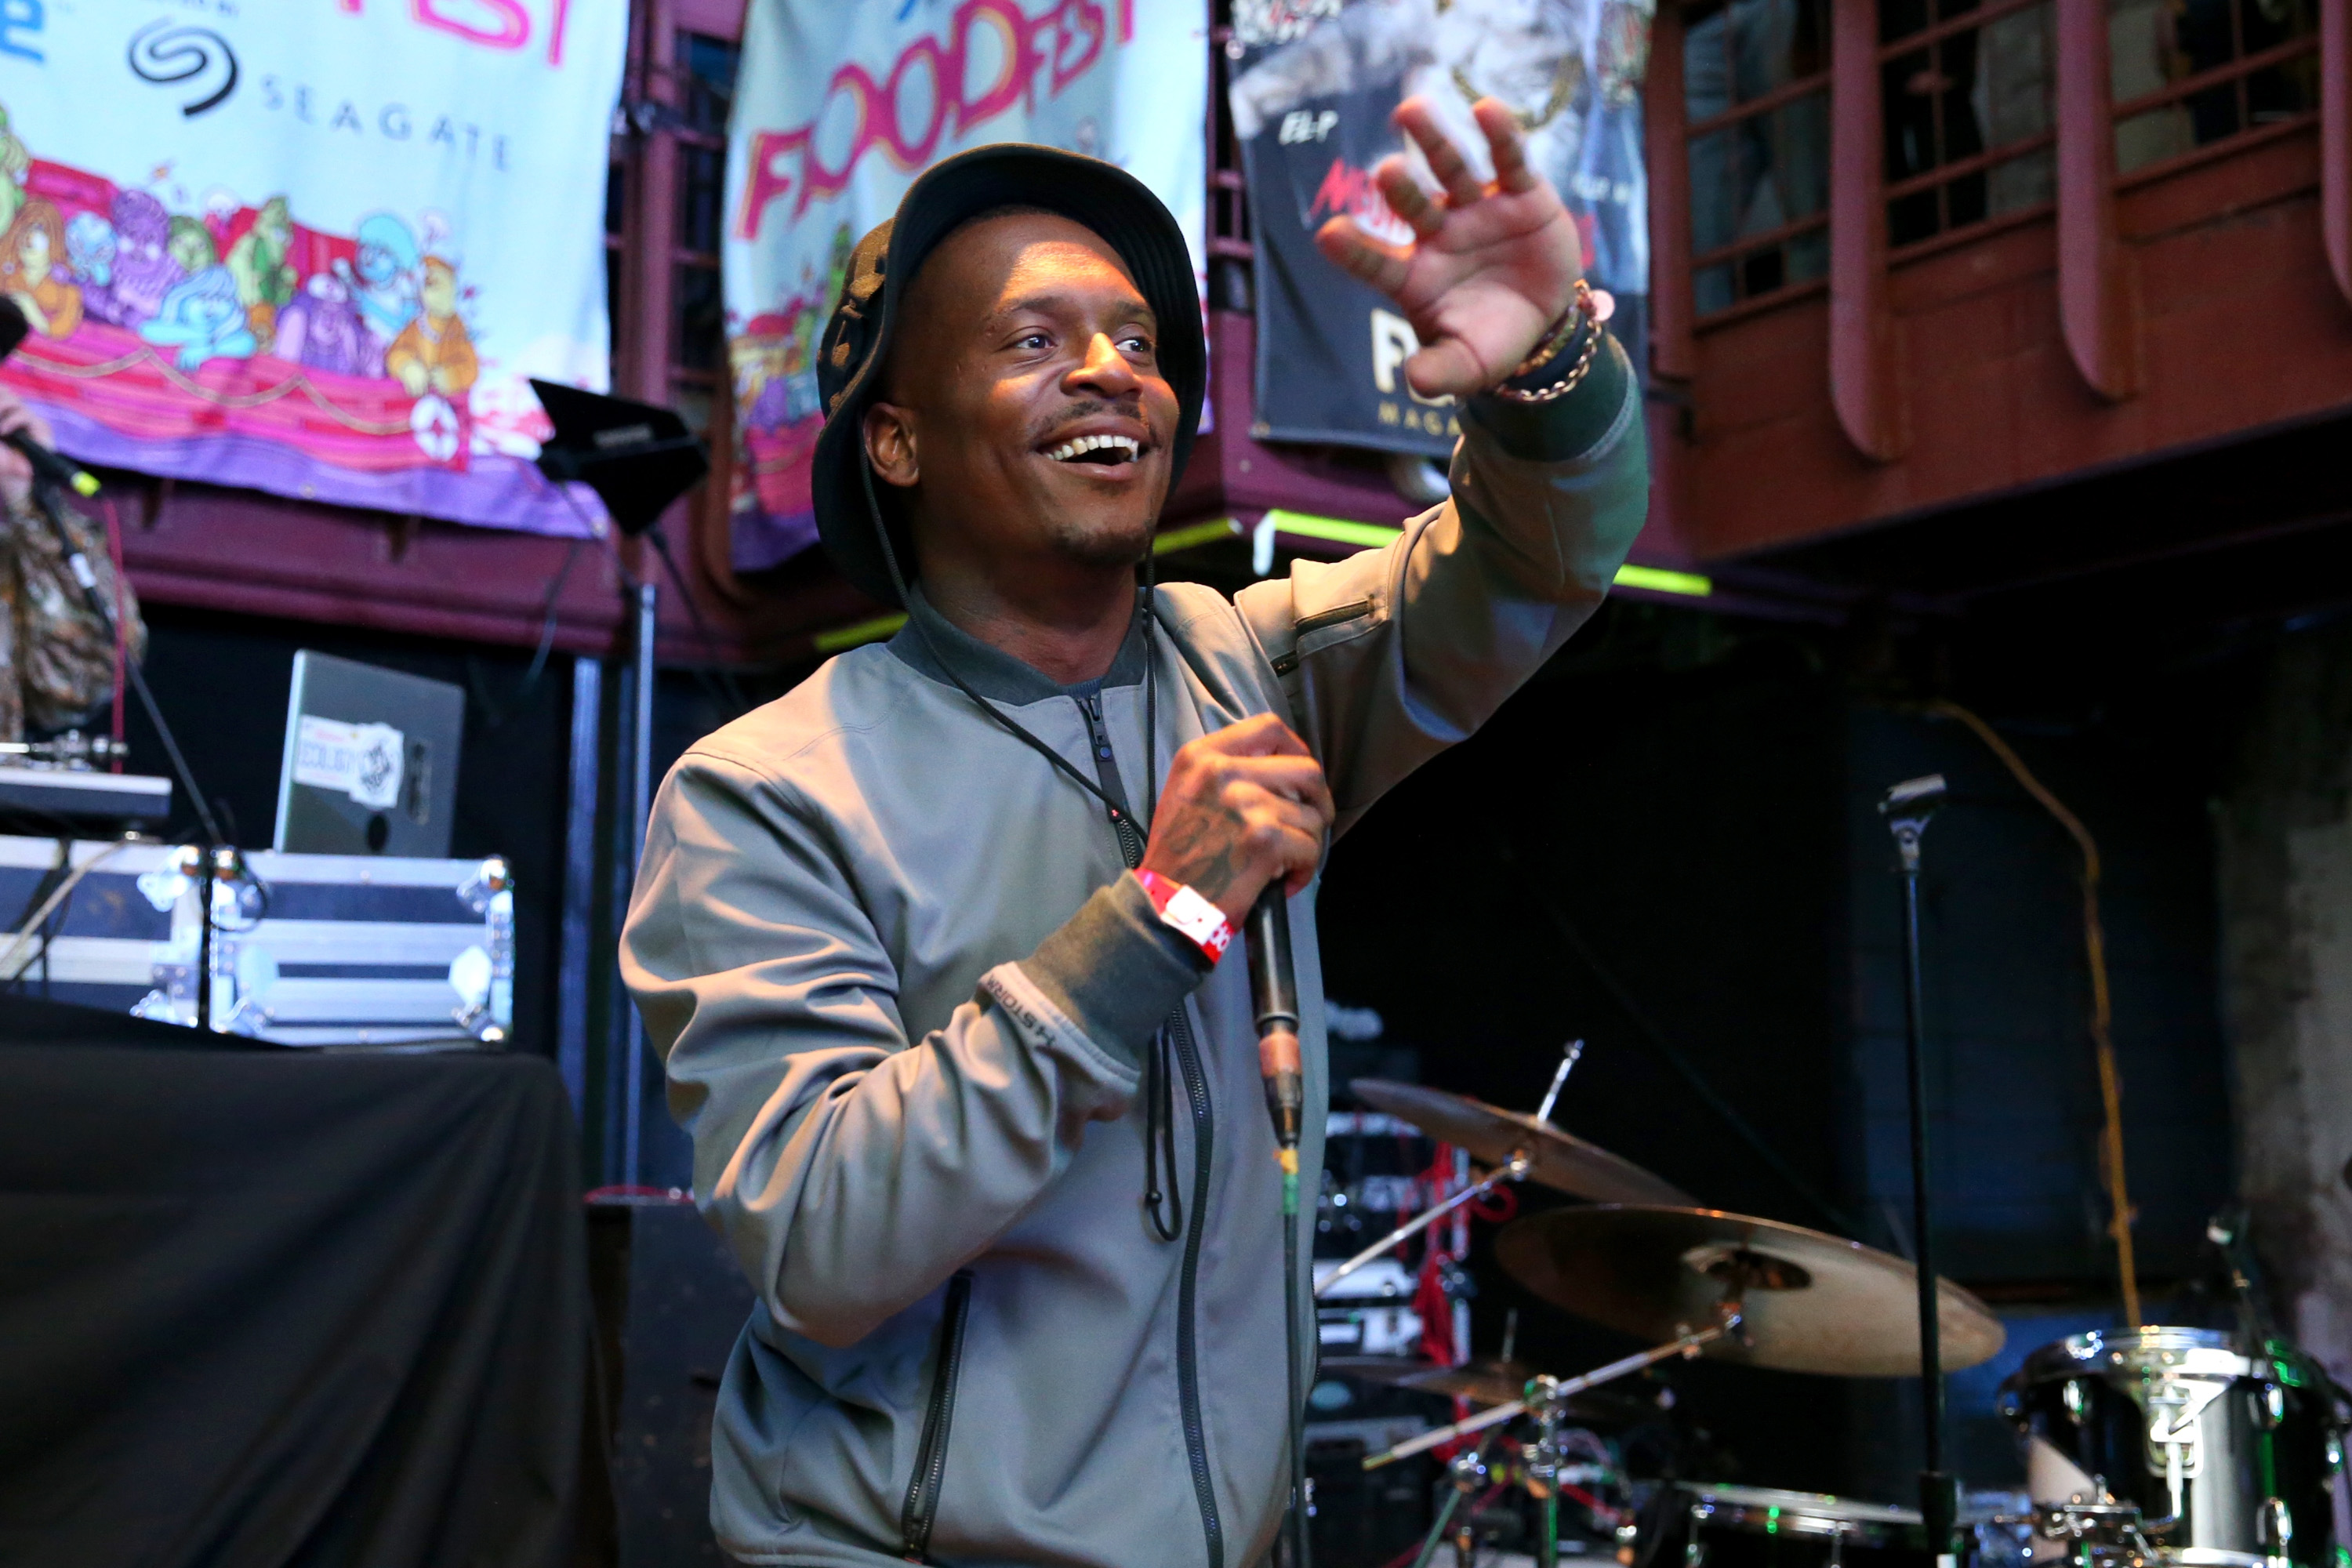 Rapper Fashawn performs onstage at the FLOODfest showcase in Austin, Texas.